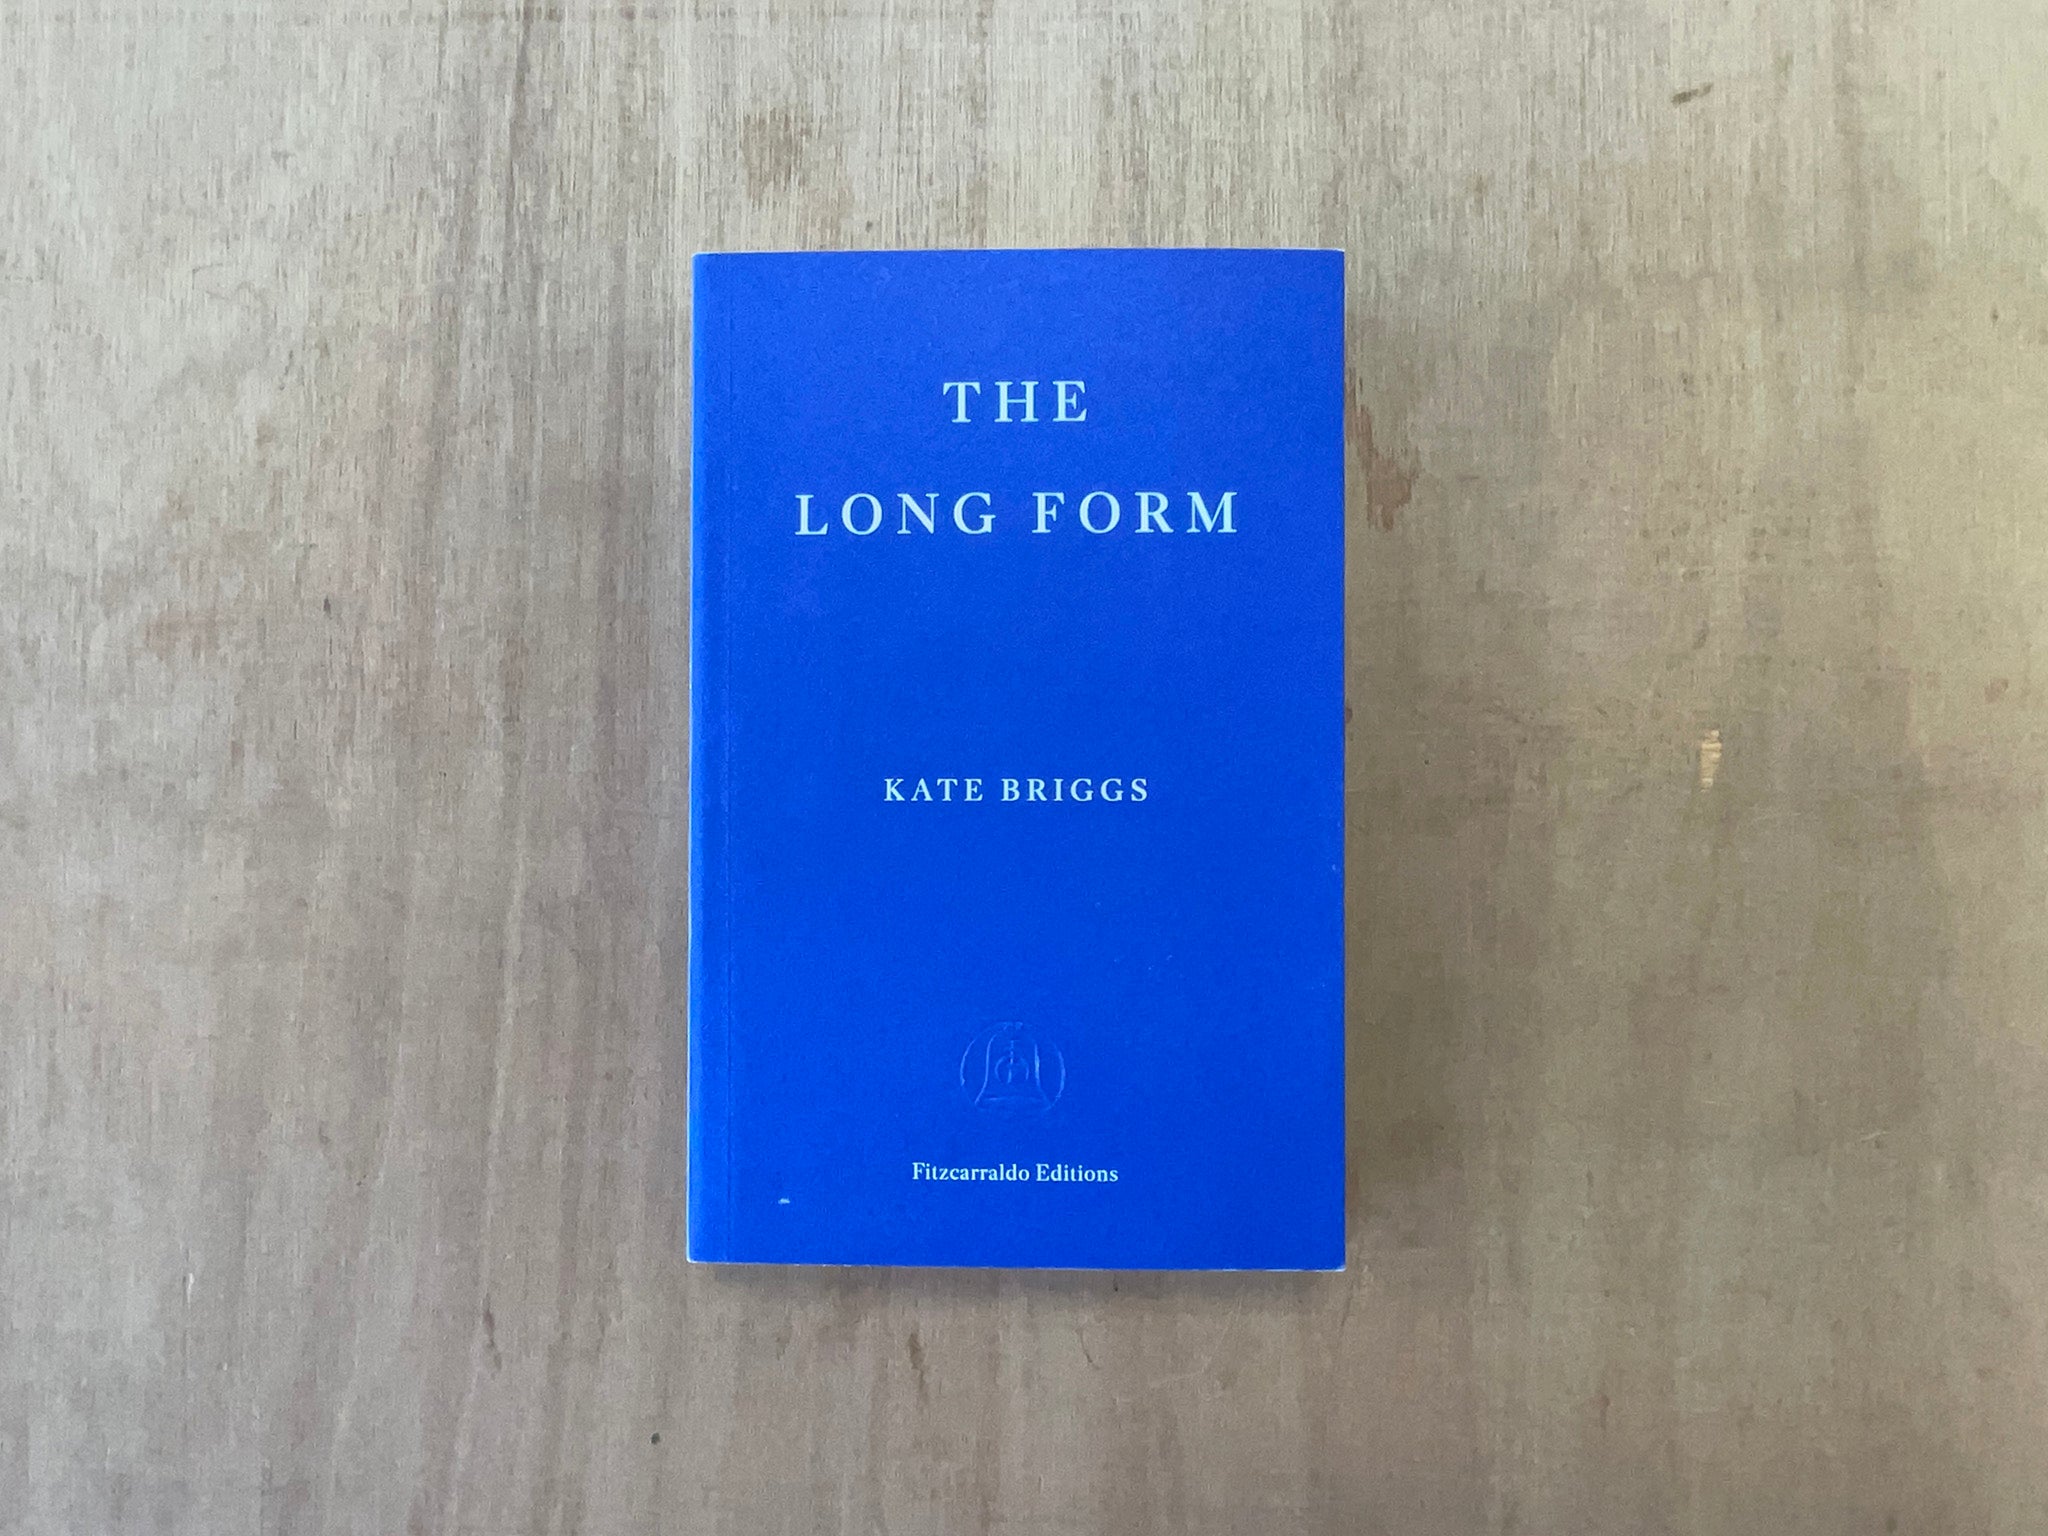 THE LONG FORM by Kate Briggs